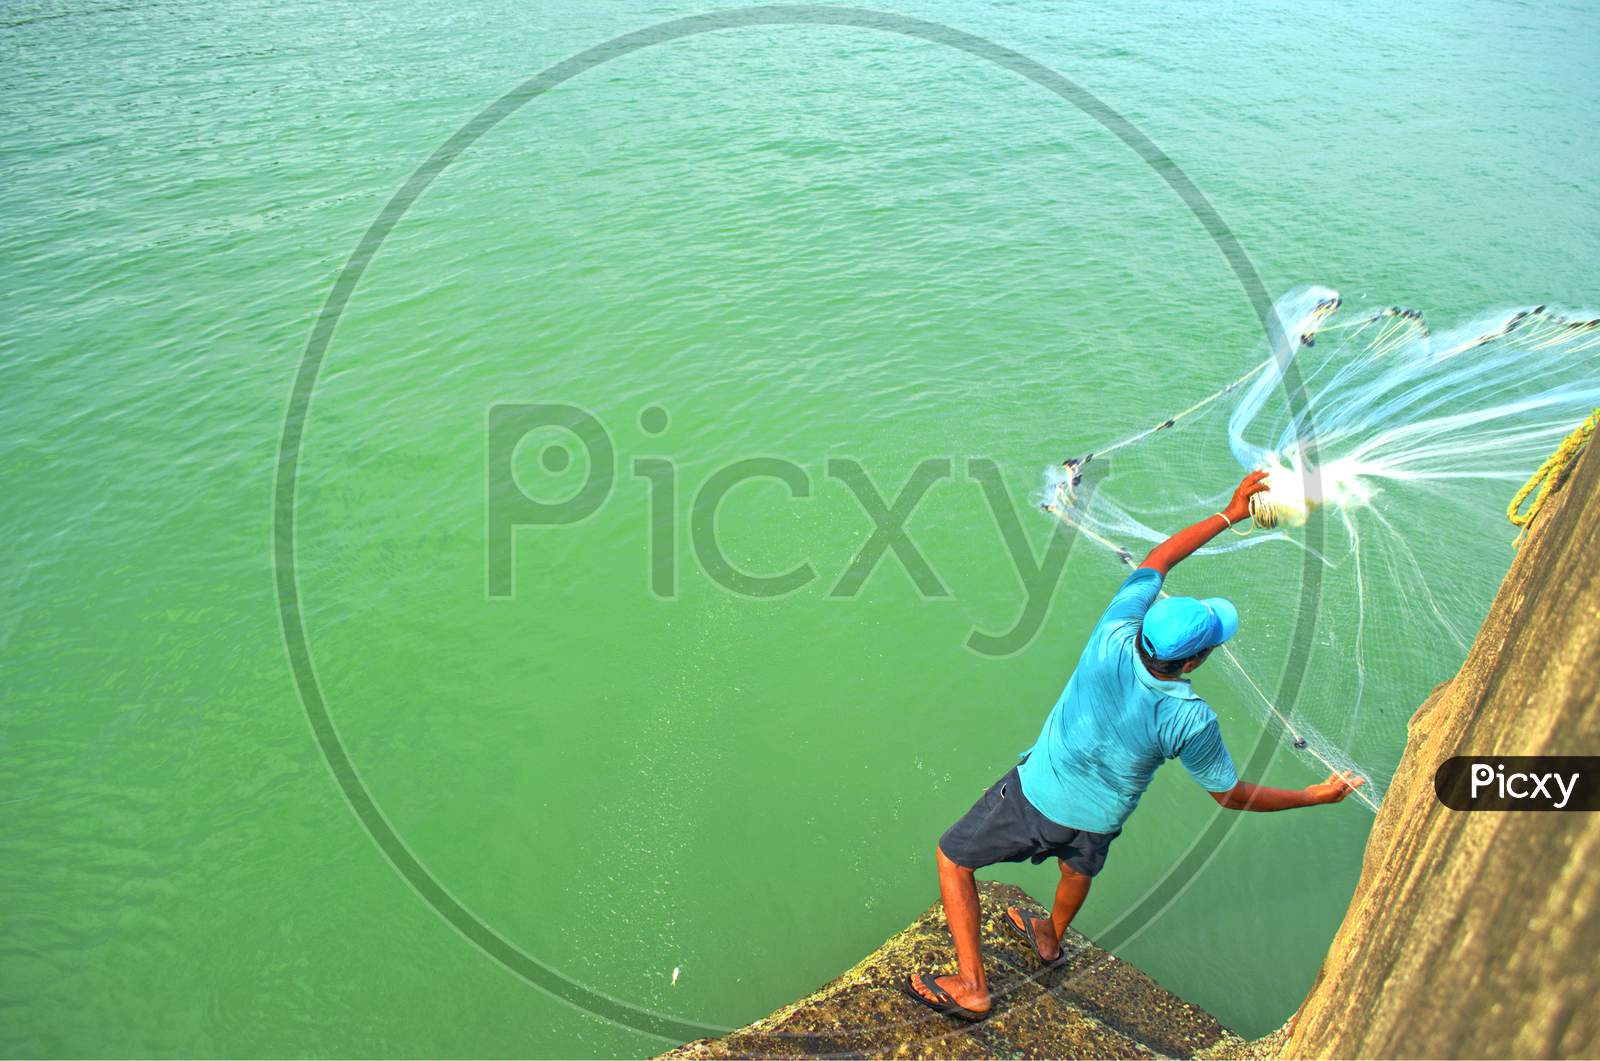 Fisherman Spreading His Net In Sea To Catch Fish